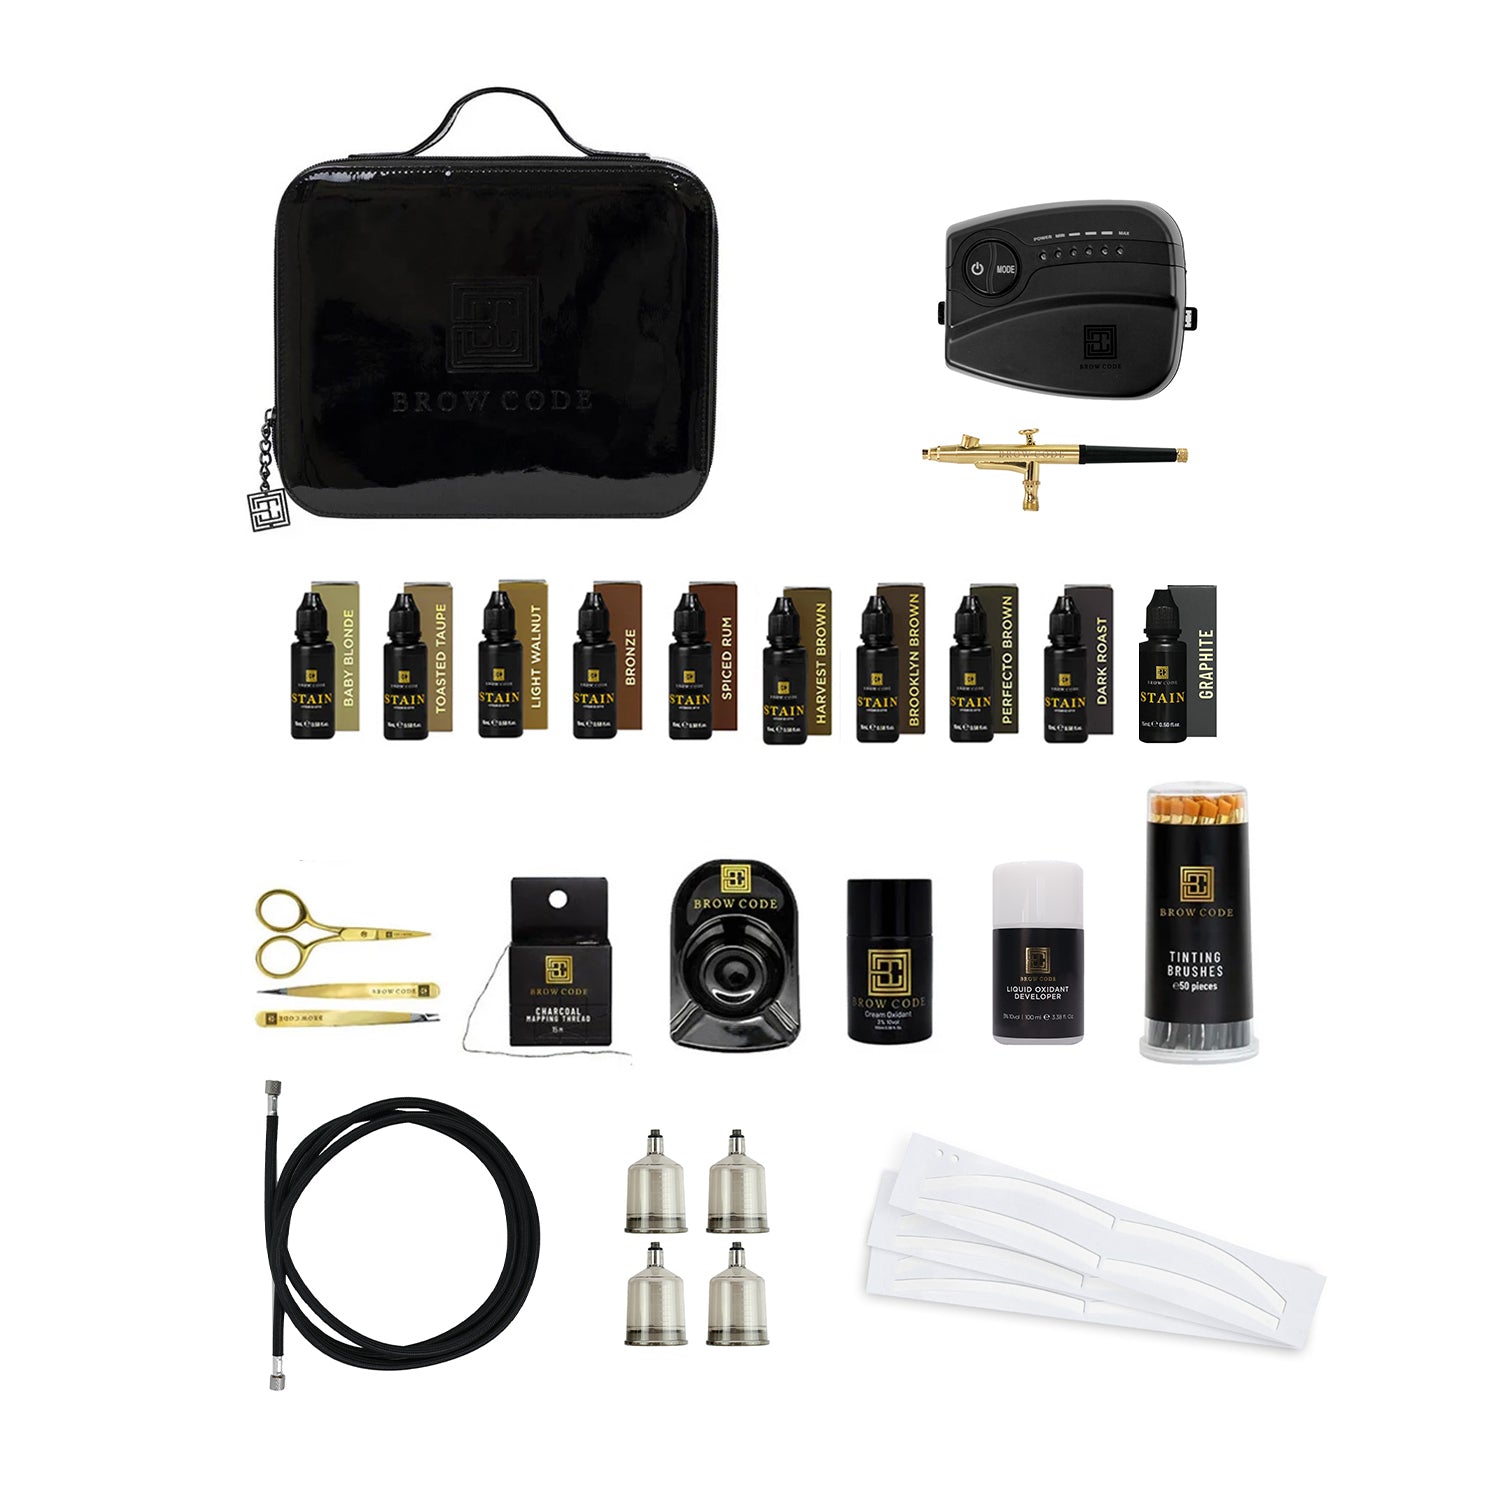 Contents of the AIrbrush kit against a white background